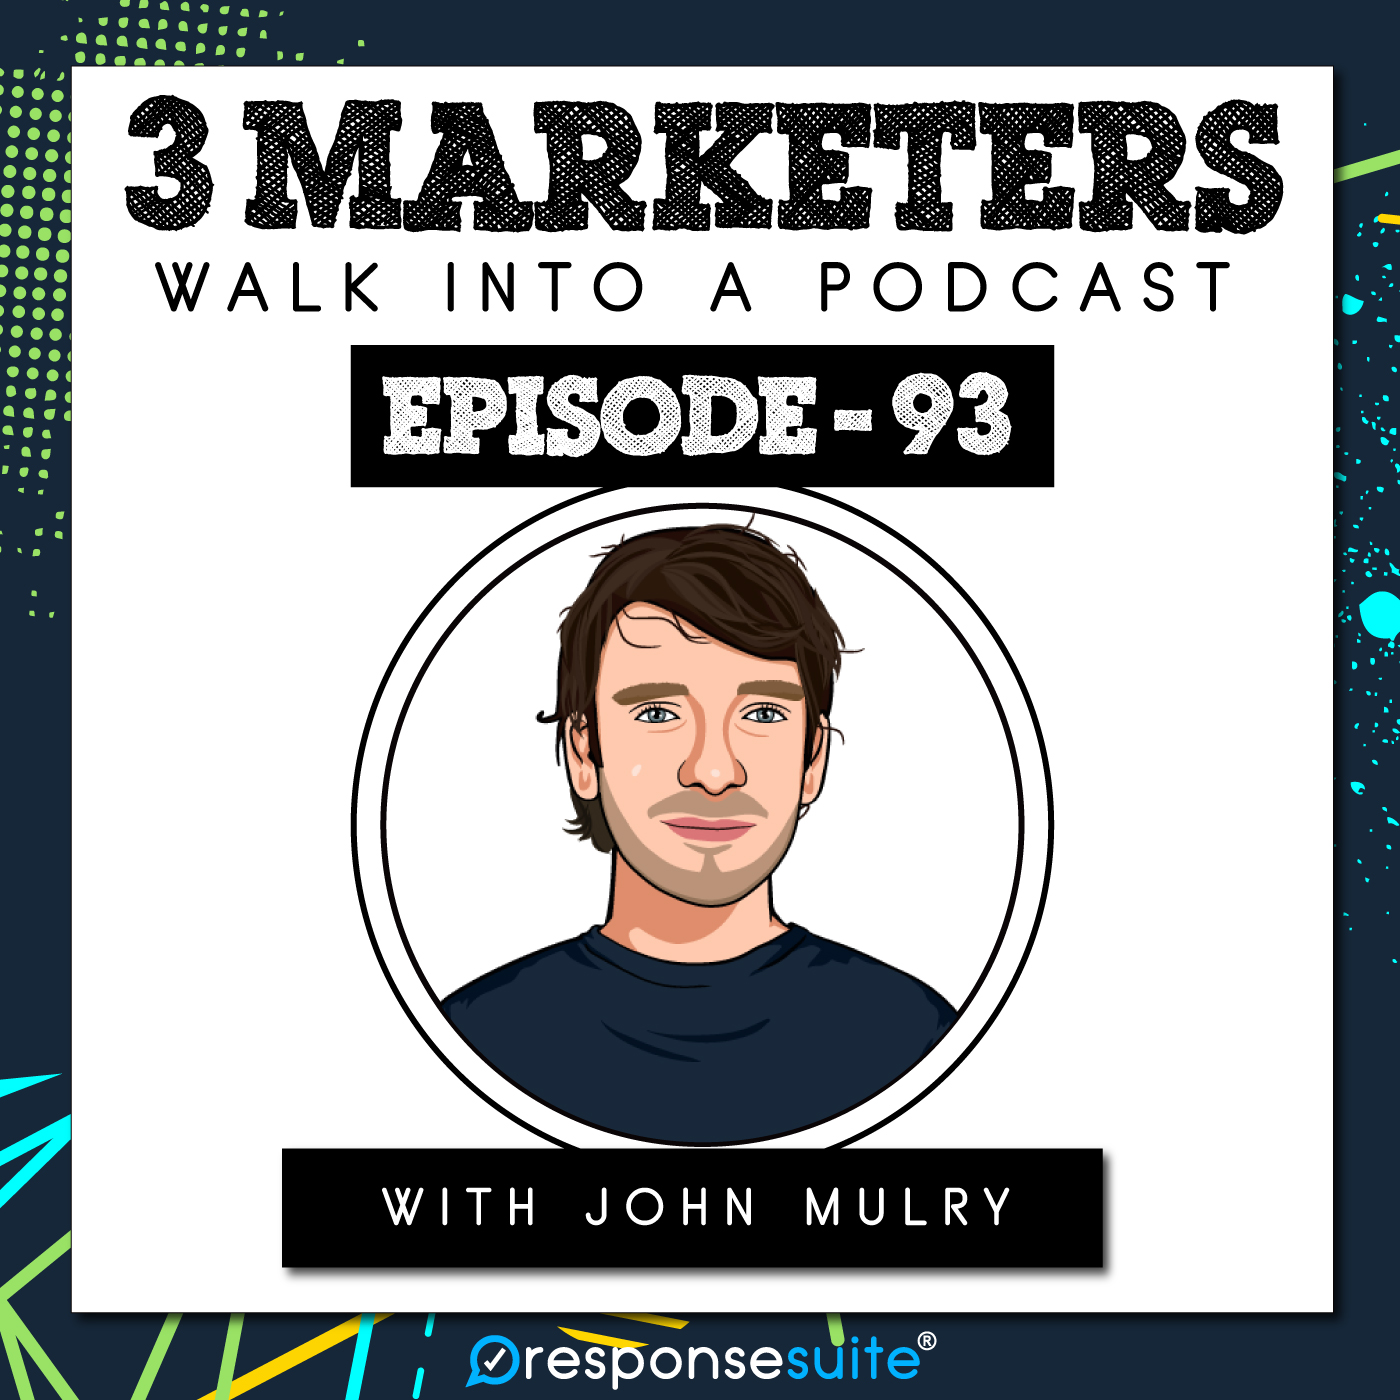 Artwork for podcast 3 Marketers Walk Into A Podcast